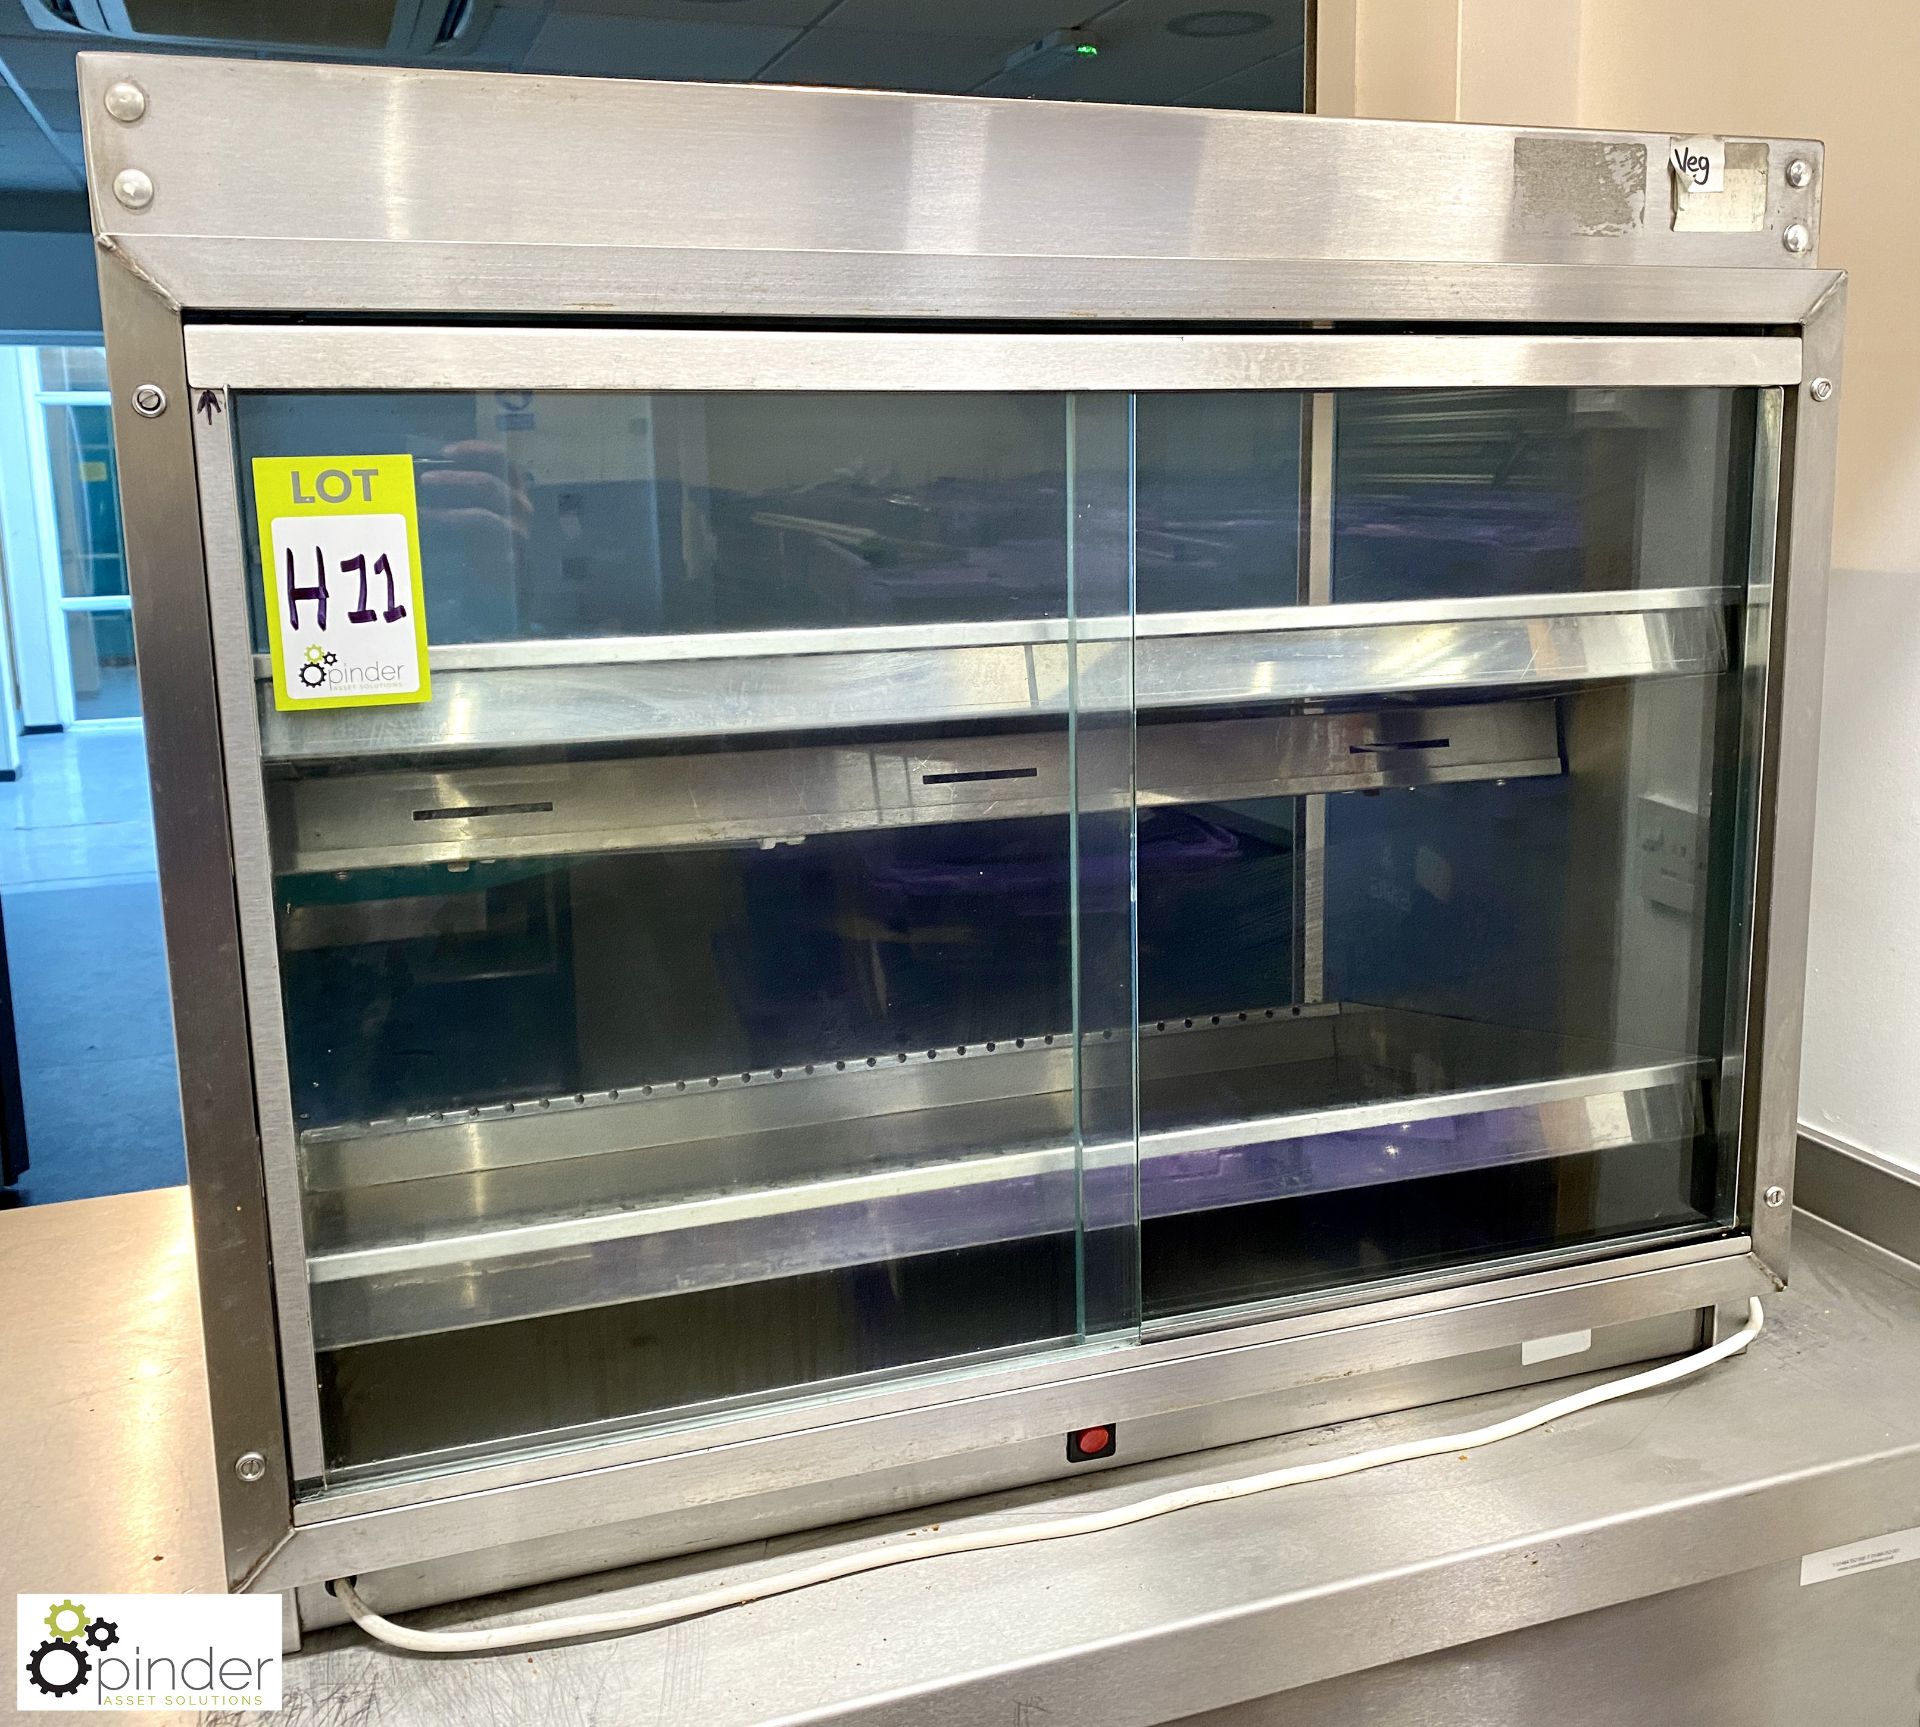 Stainless steel counter top Hot Pie Cabinet, 240volts, 900mm x 530mm x 740mm